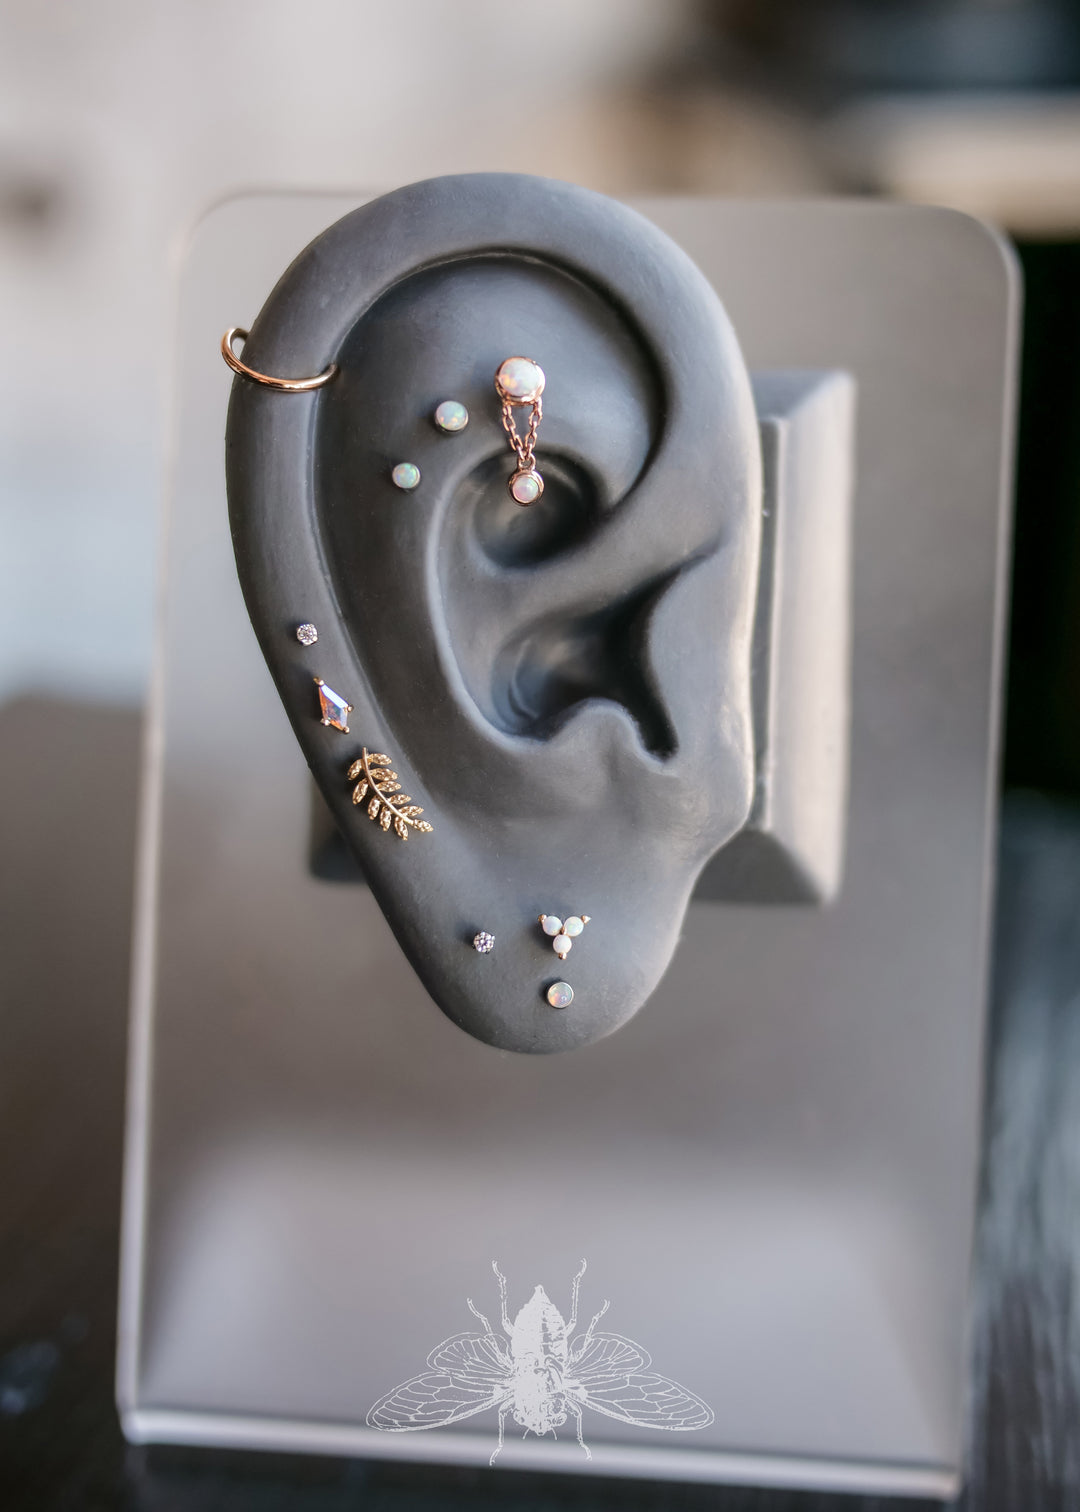 curated ear project featuring favourites from top body jewelry brands like Neometal, Buddha Jewelry Organics, Junipurr Jewelry & More